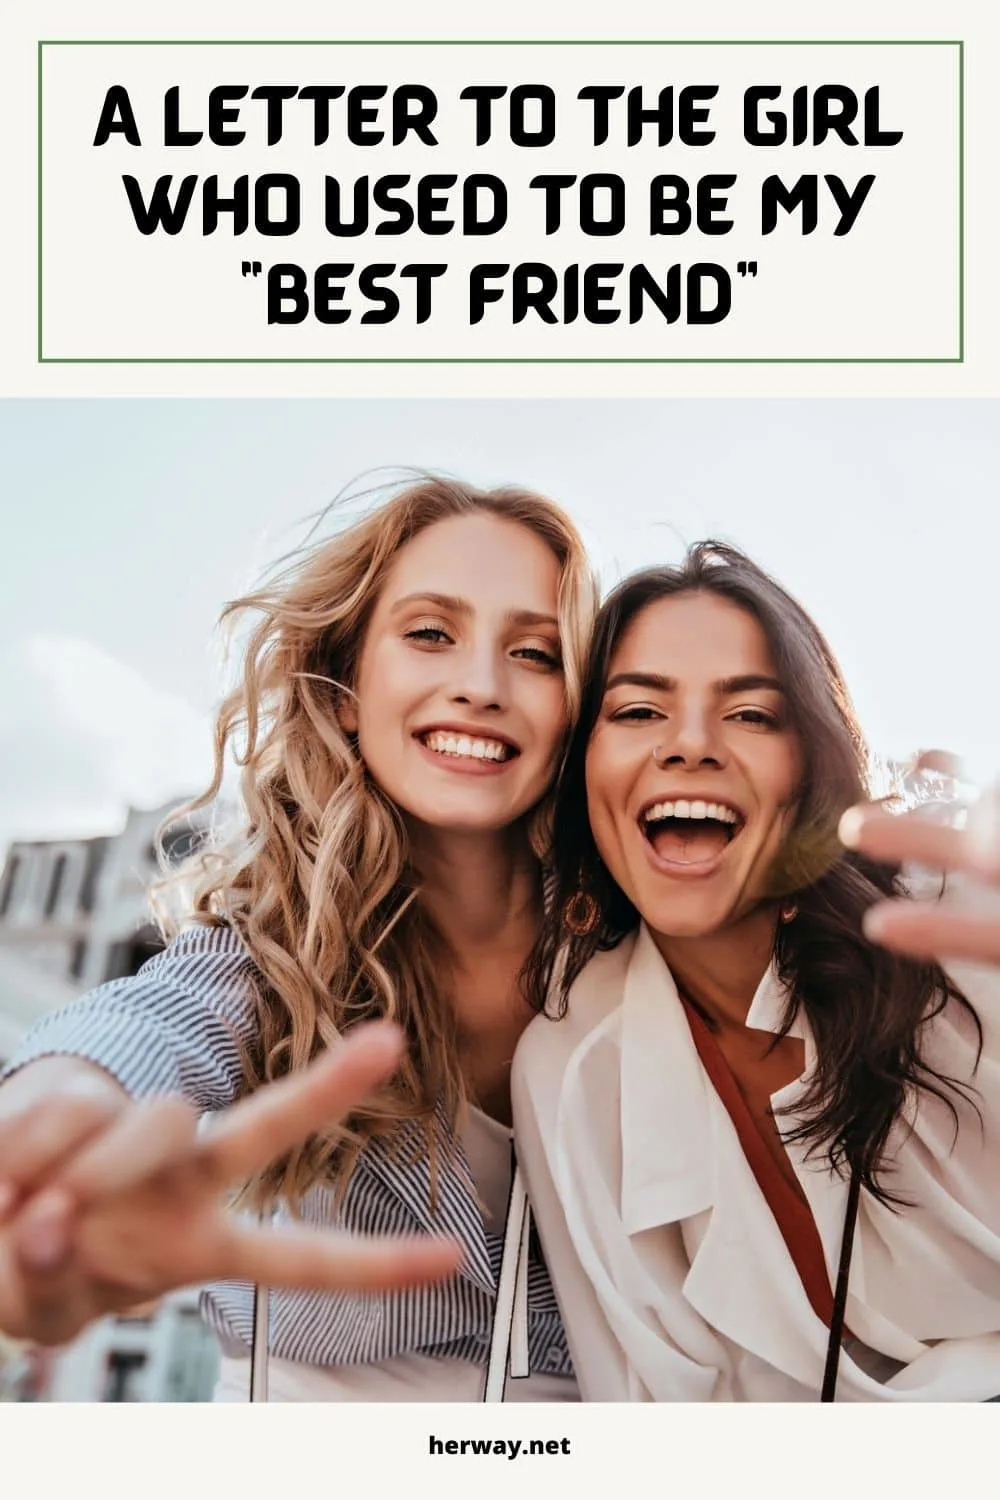 A Letter To The Girl Who Used To Be My “Best Friend”